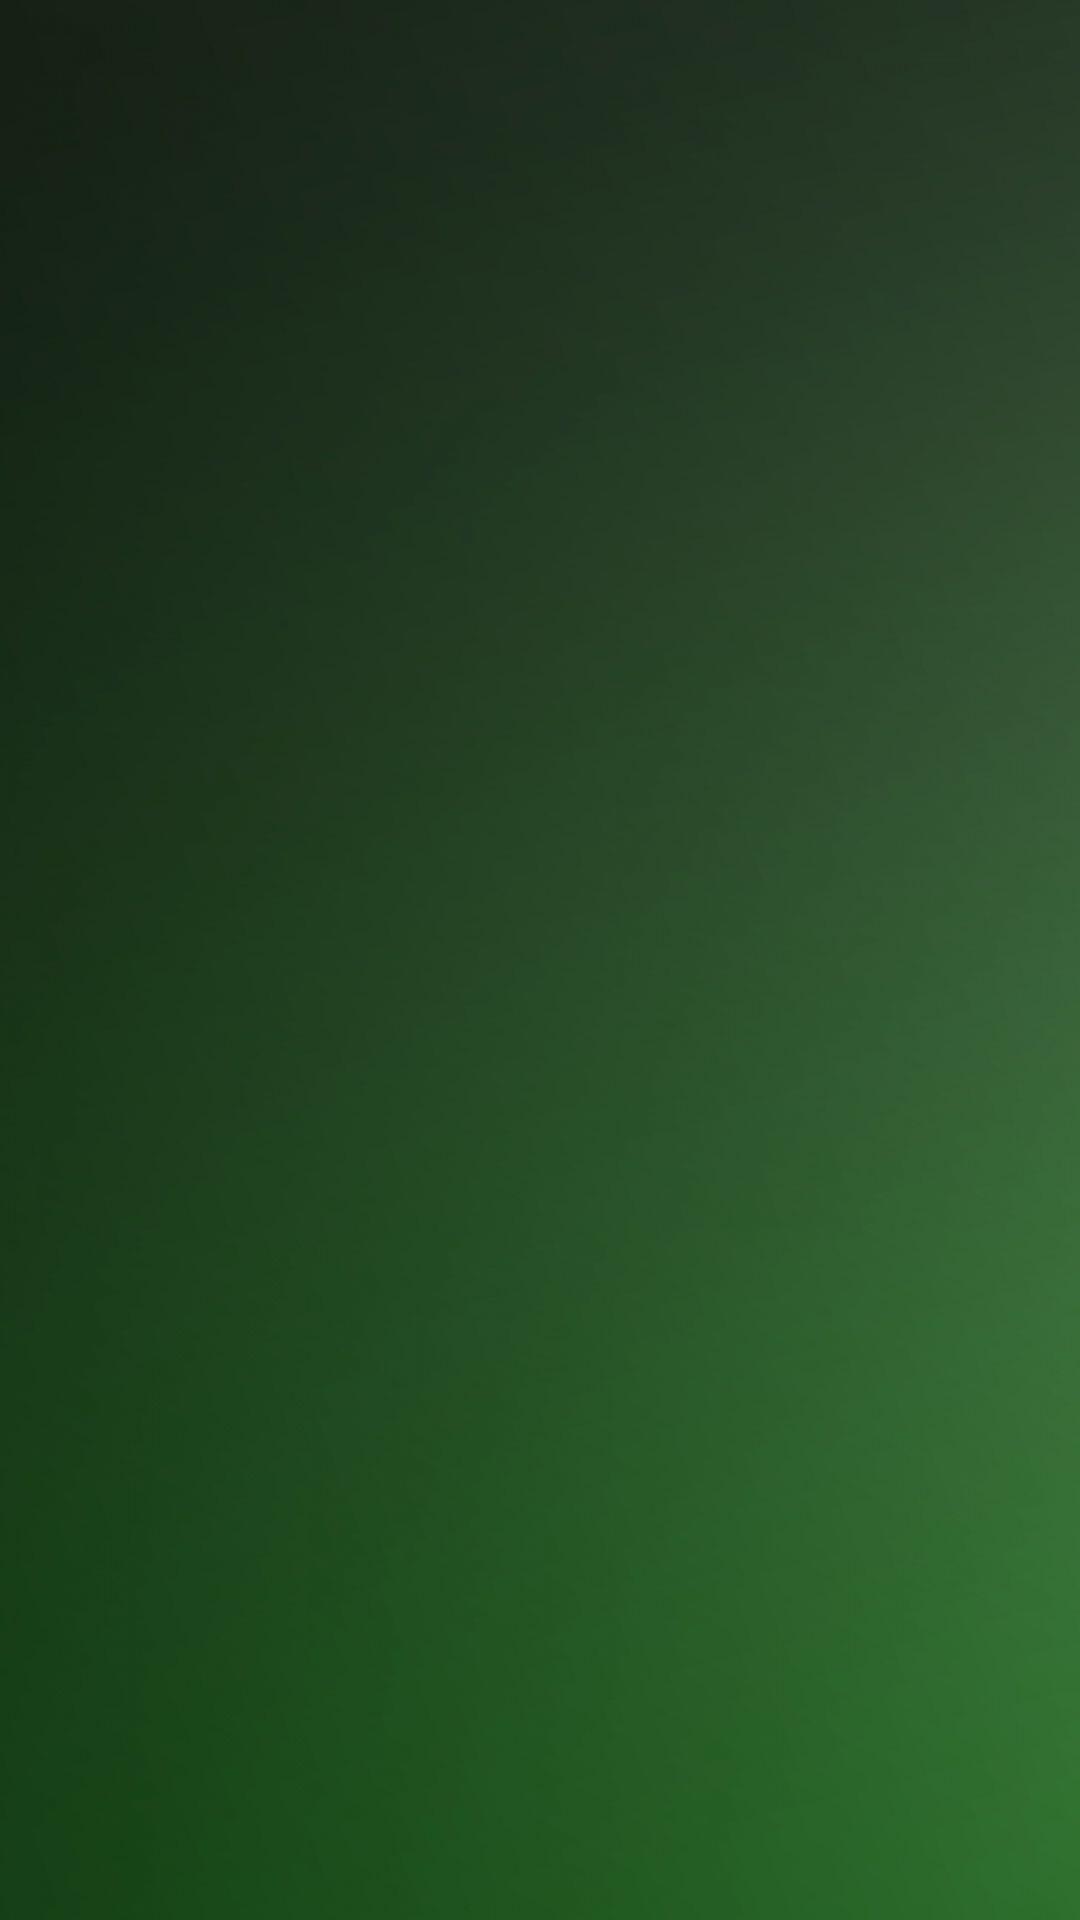 Wallpaper HD Of Background Dark Green Color Gradient Solid Bright